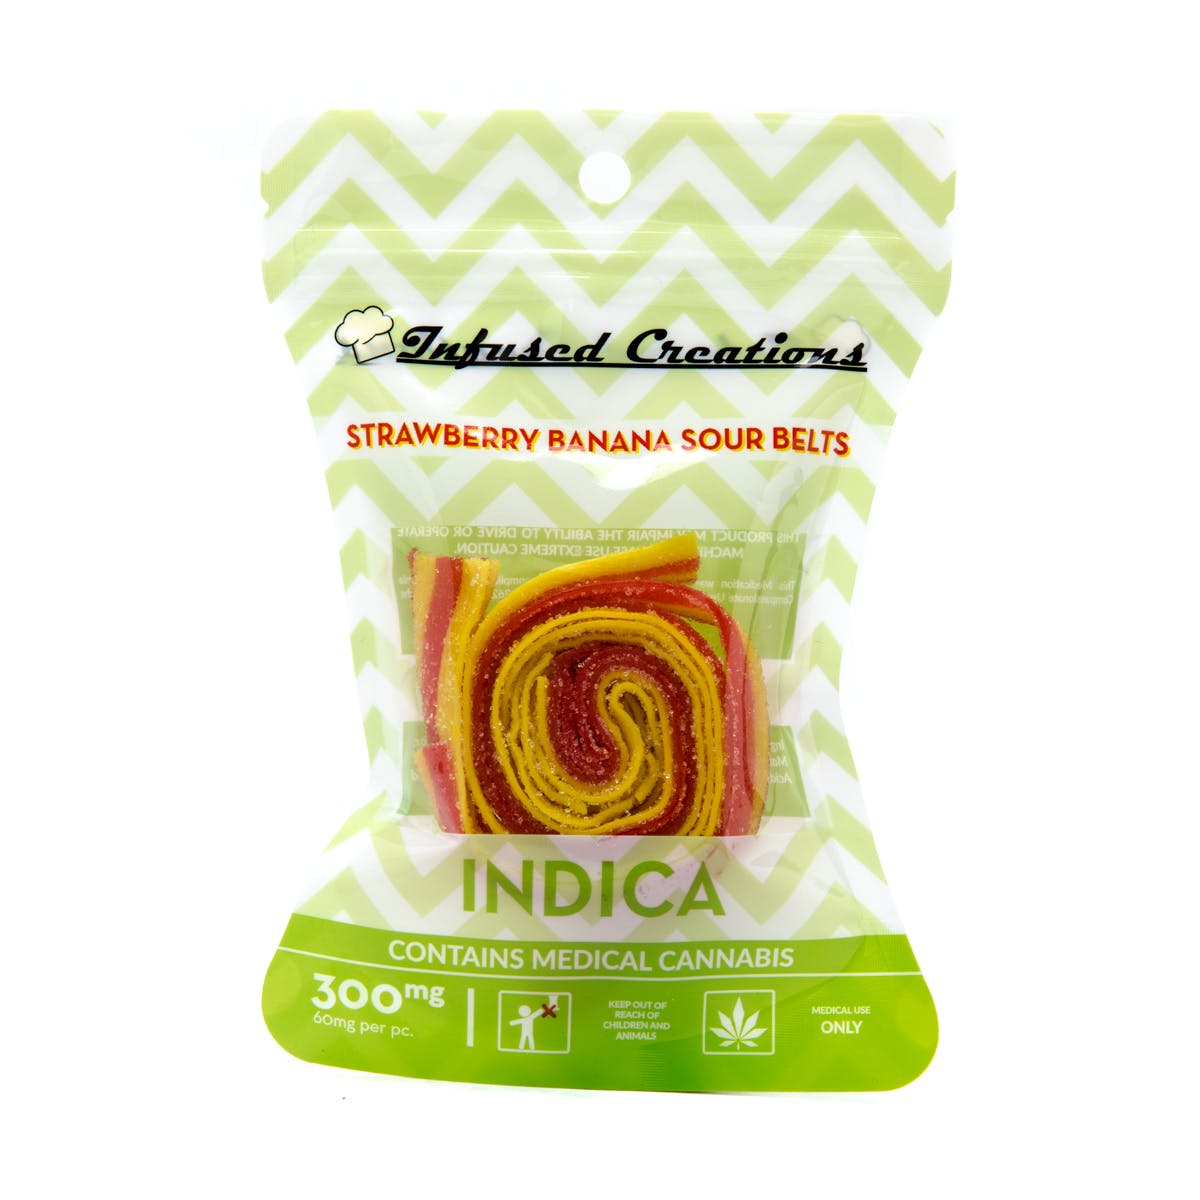 Strawberry Banana Sour Belts Indica, 300mg